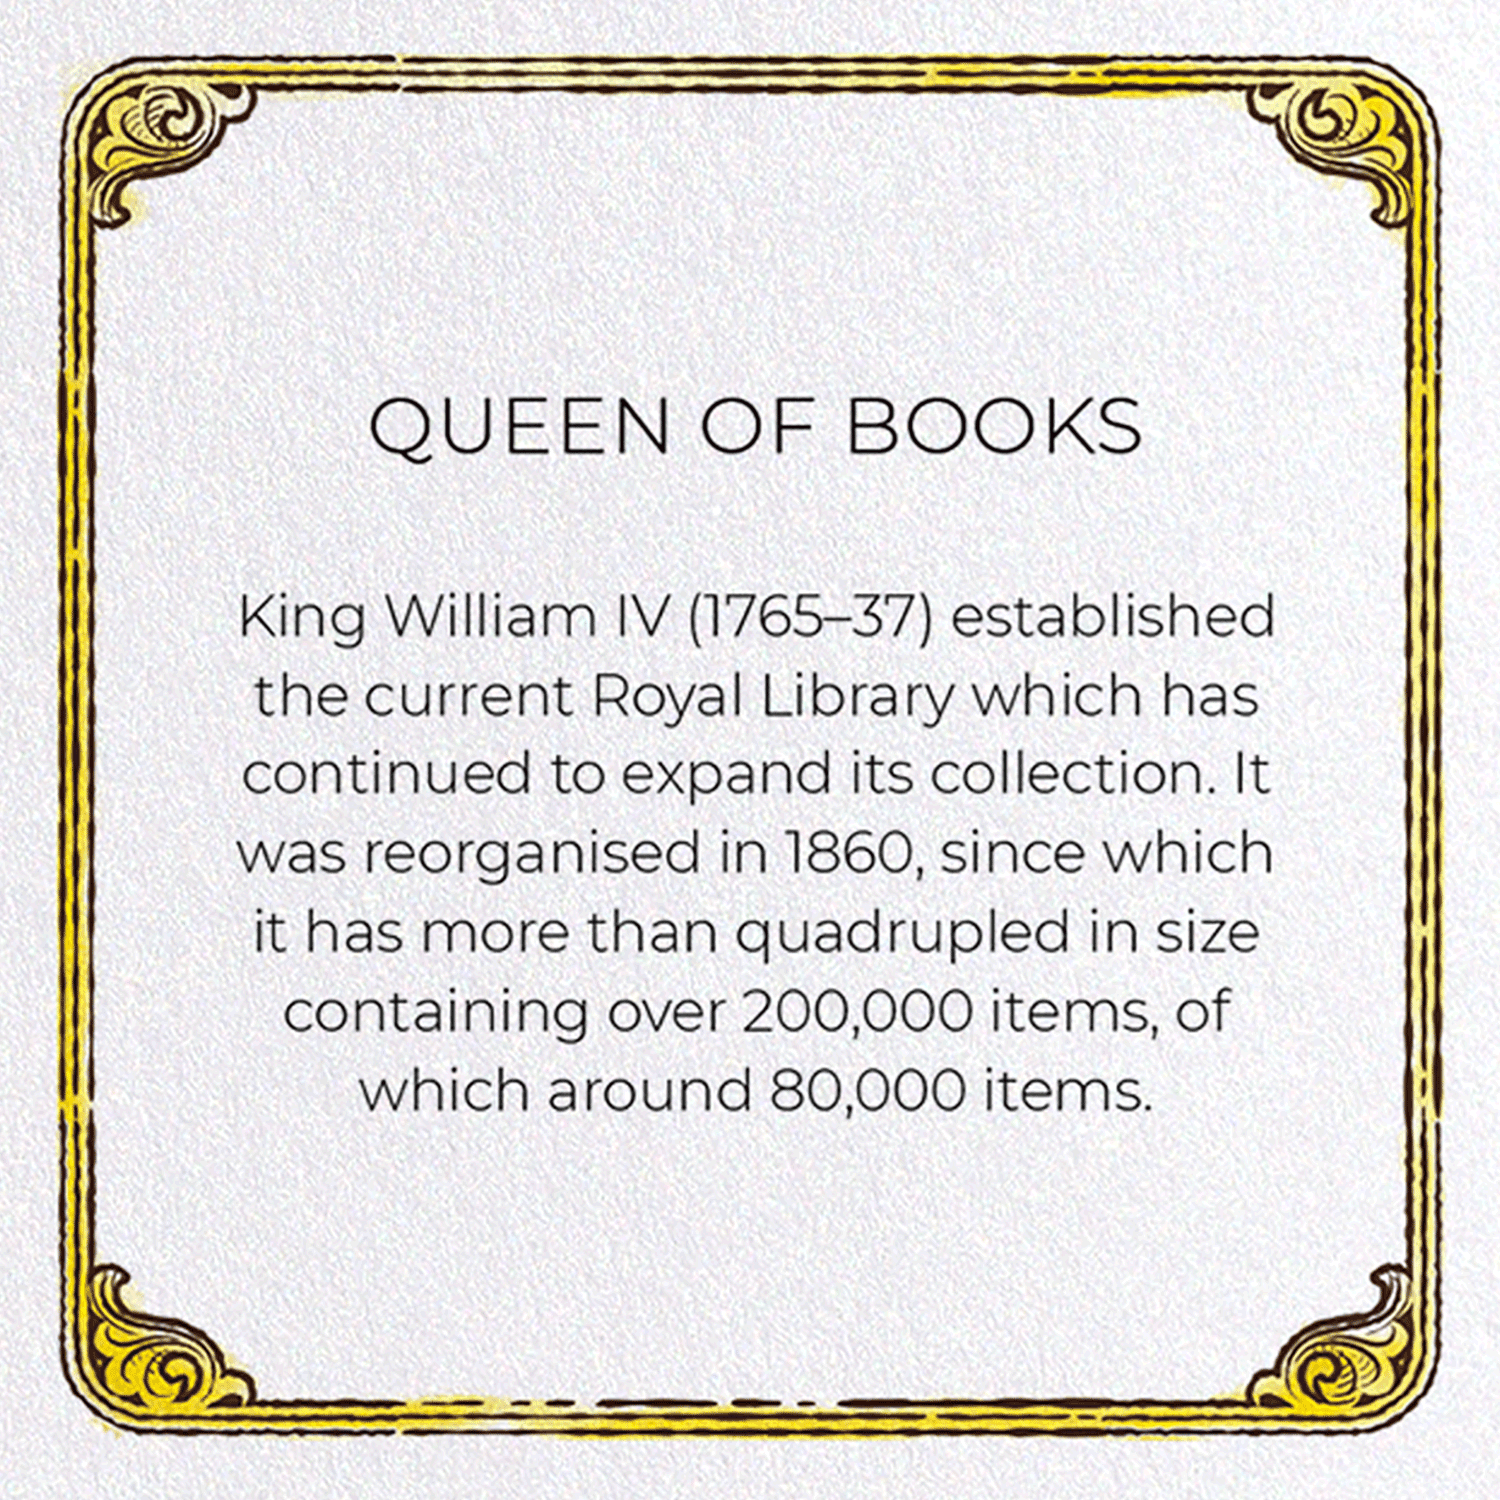 QUEEN OF BOOKS: Victorian Greeting Card